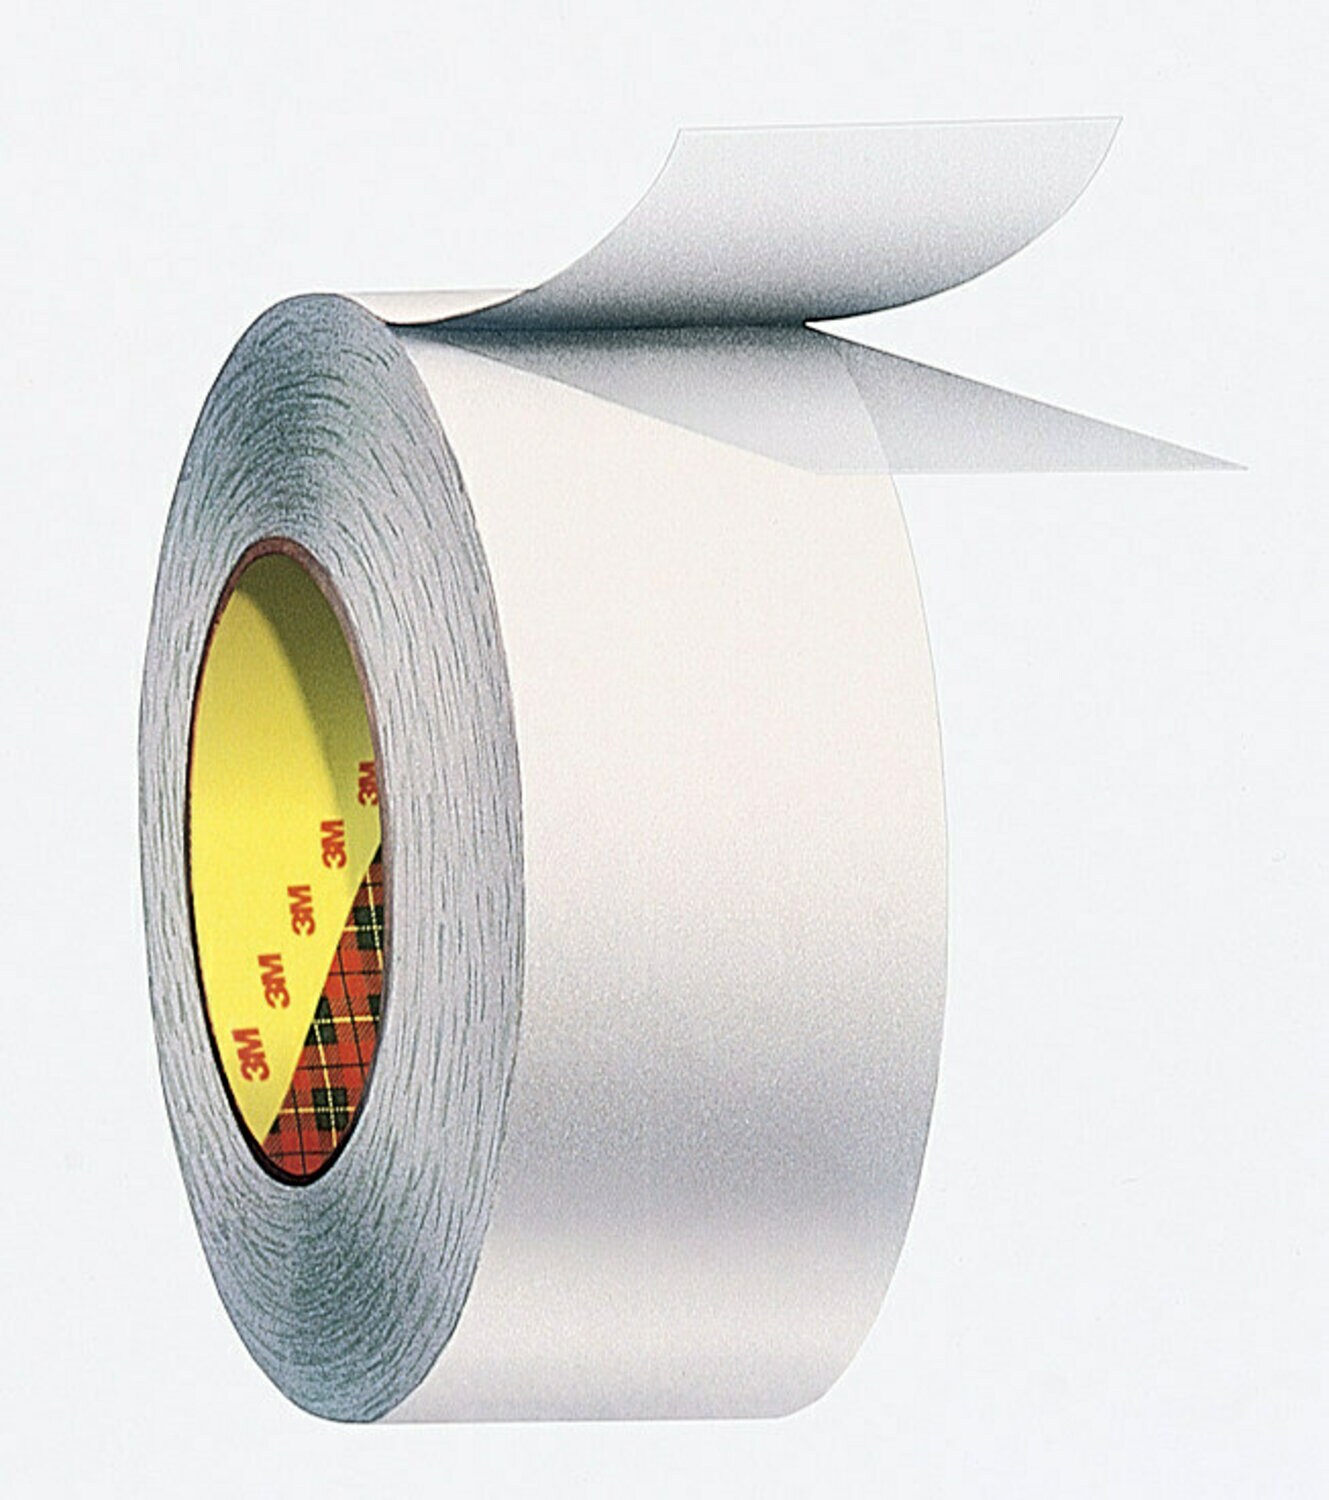 00021200143908, 3M Removable Repositionable Tape 666, Clear, 1/2 in x 72  yd, 3.8 mil, 72 rolls per case, Aircraft products, specialty-application- tapes